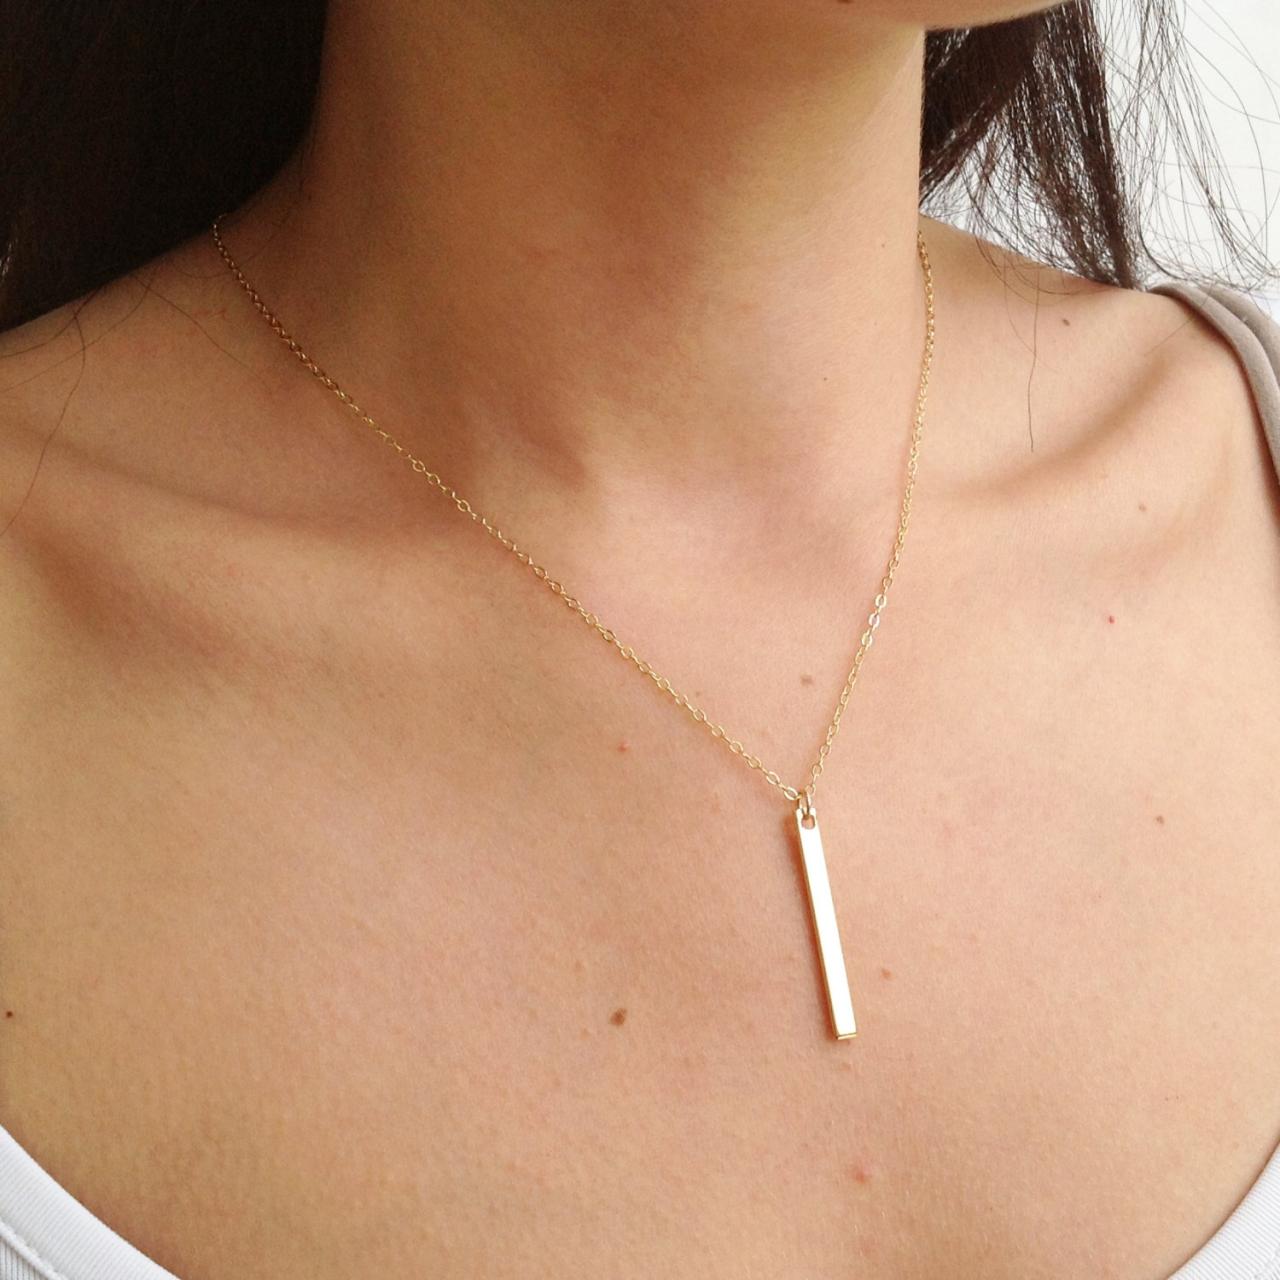 Bar necklace, gold necklace, gold filled bar necklace, bar jewelry B026